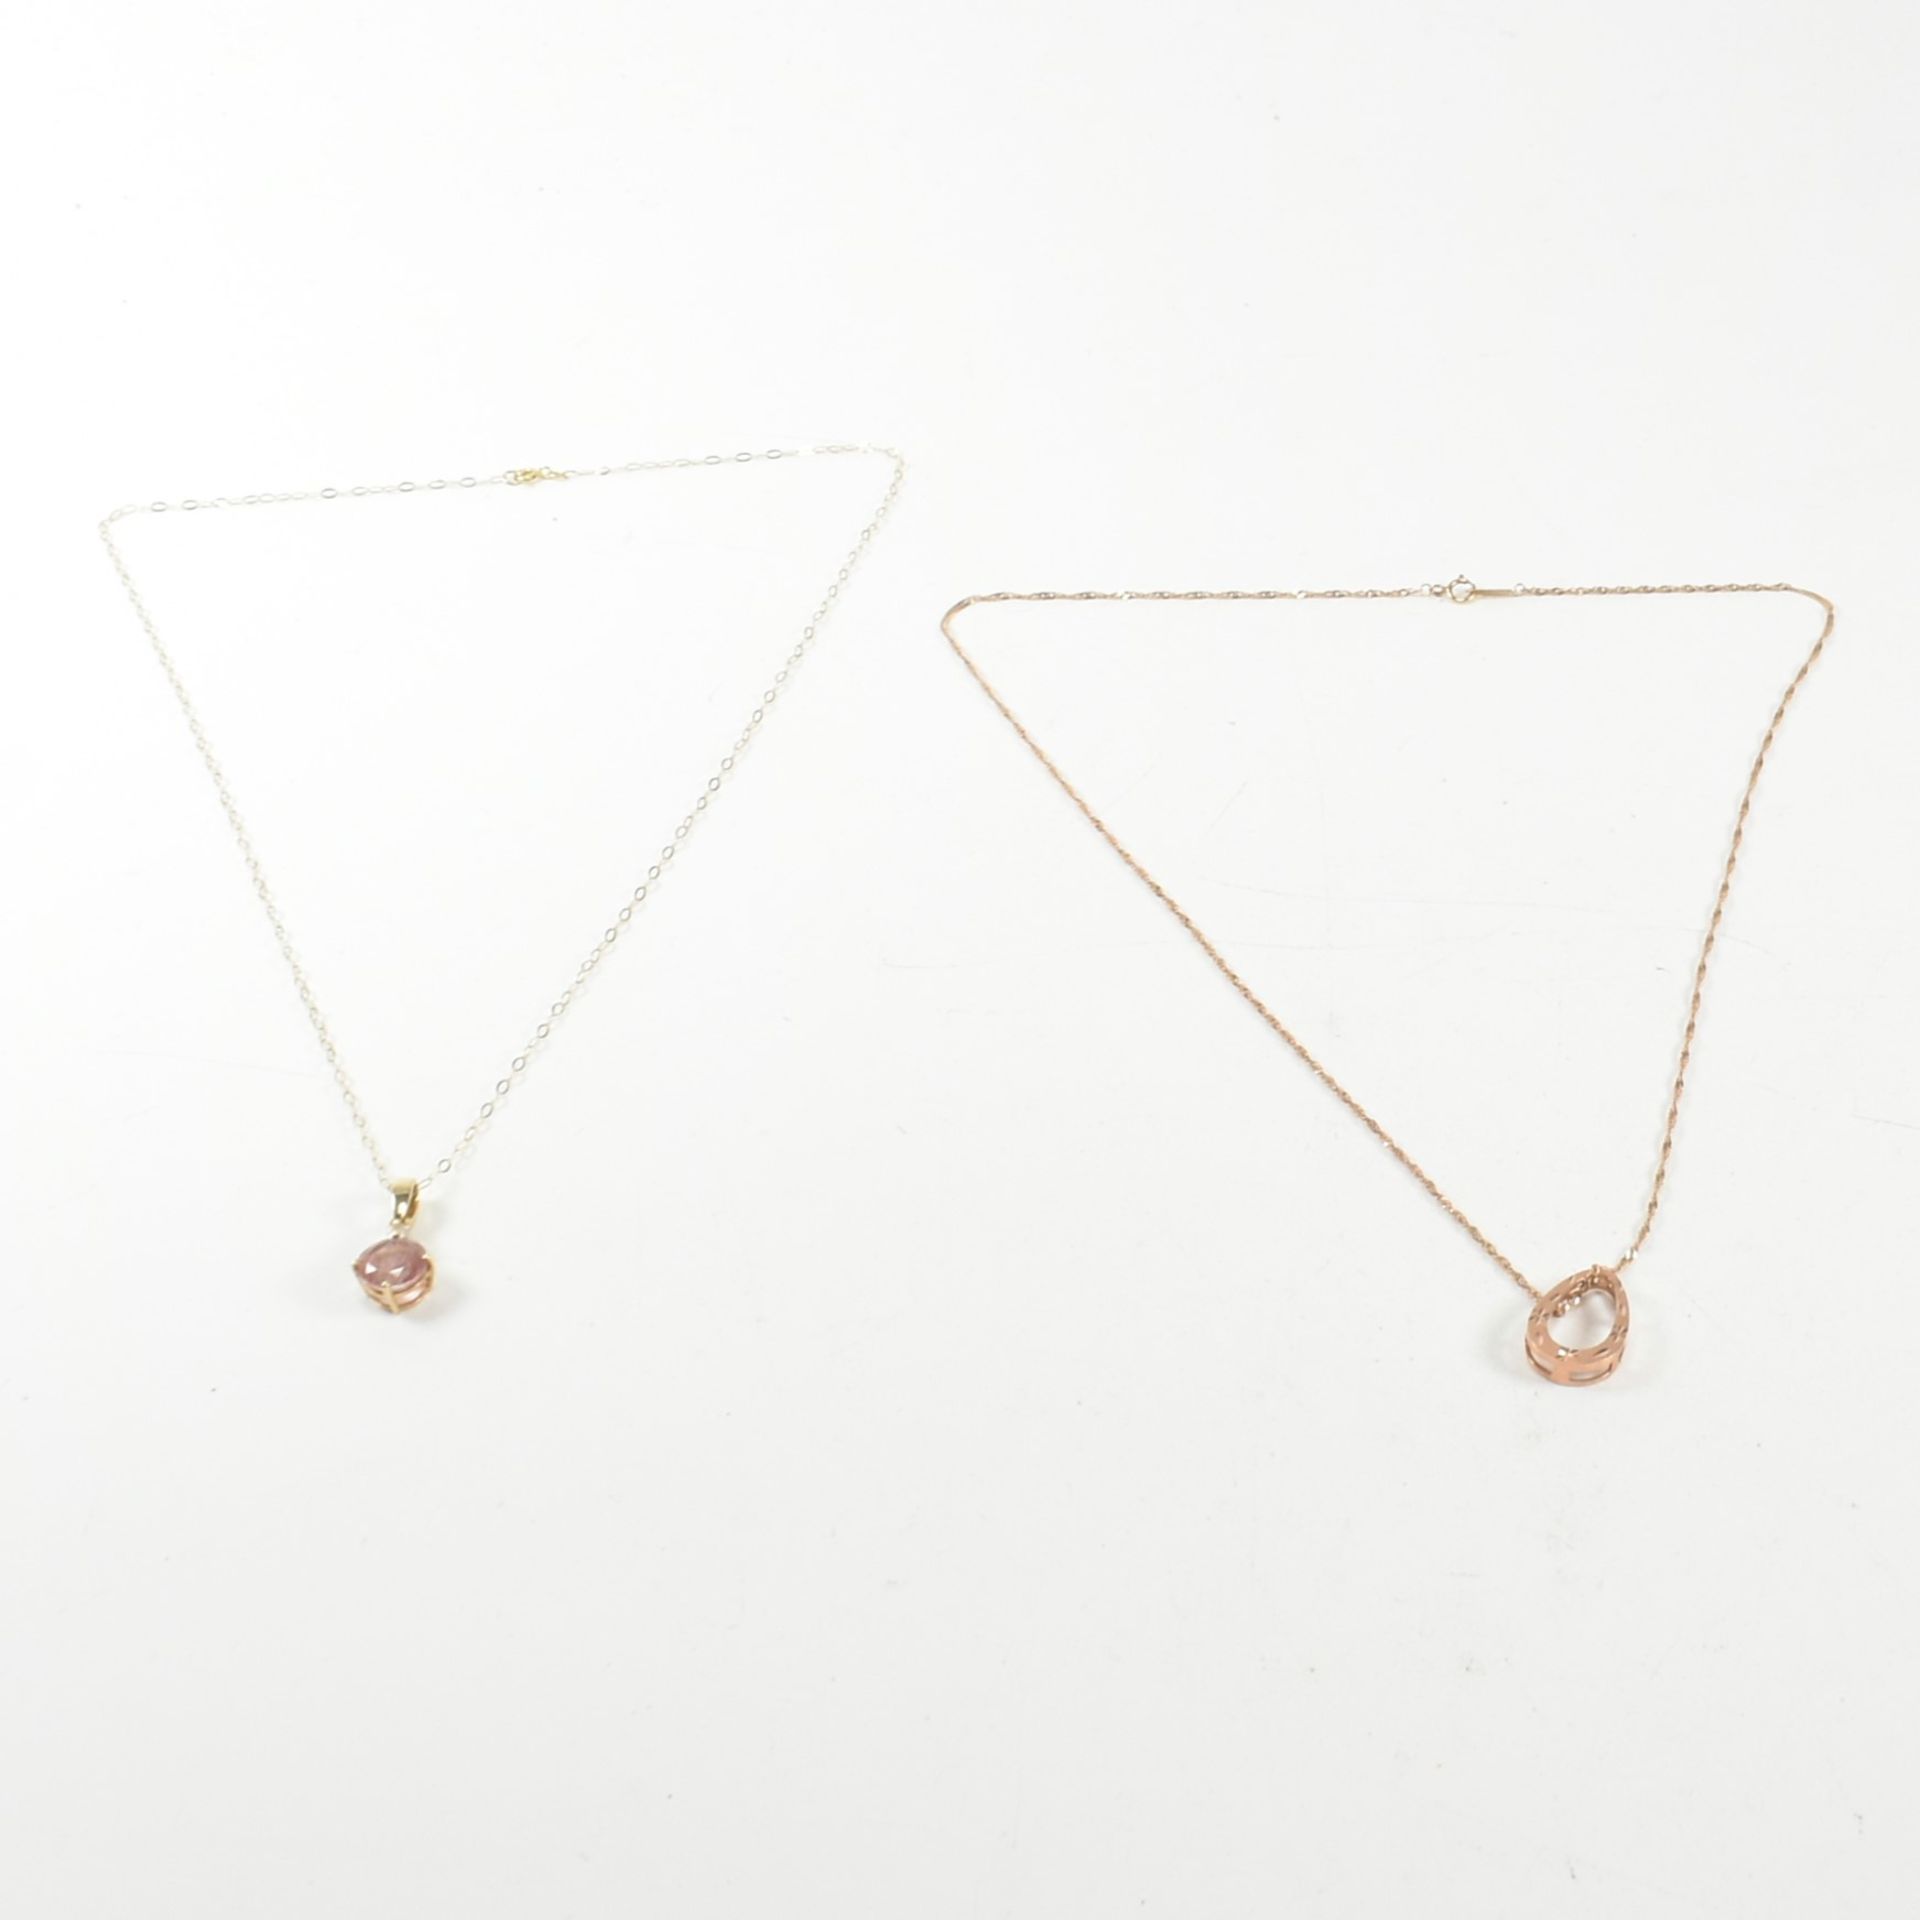 9CT ROSE GOLD PENDANT NECKLACE & 9CT YELLOW GOLD & GEM SET PENDANT NECKLACE - Image 3 of 6